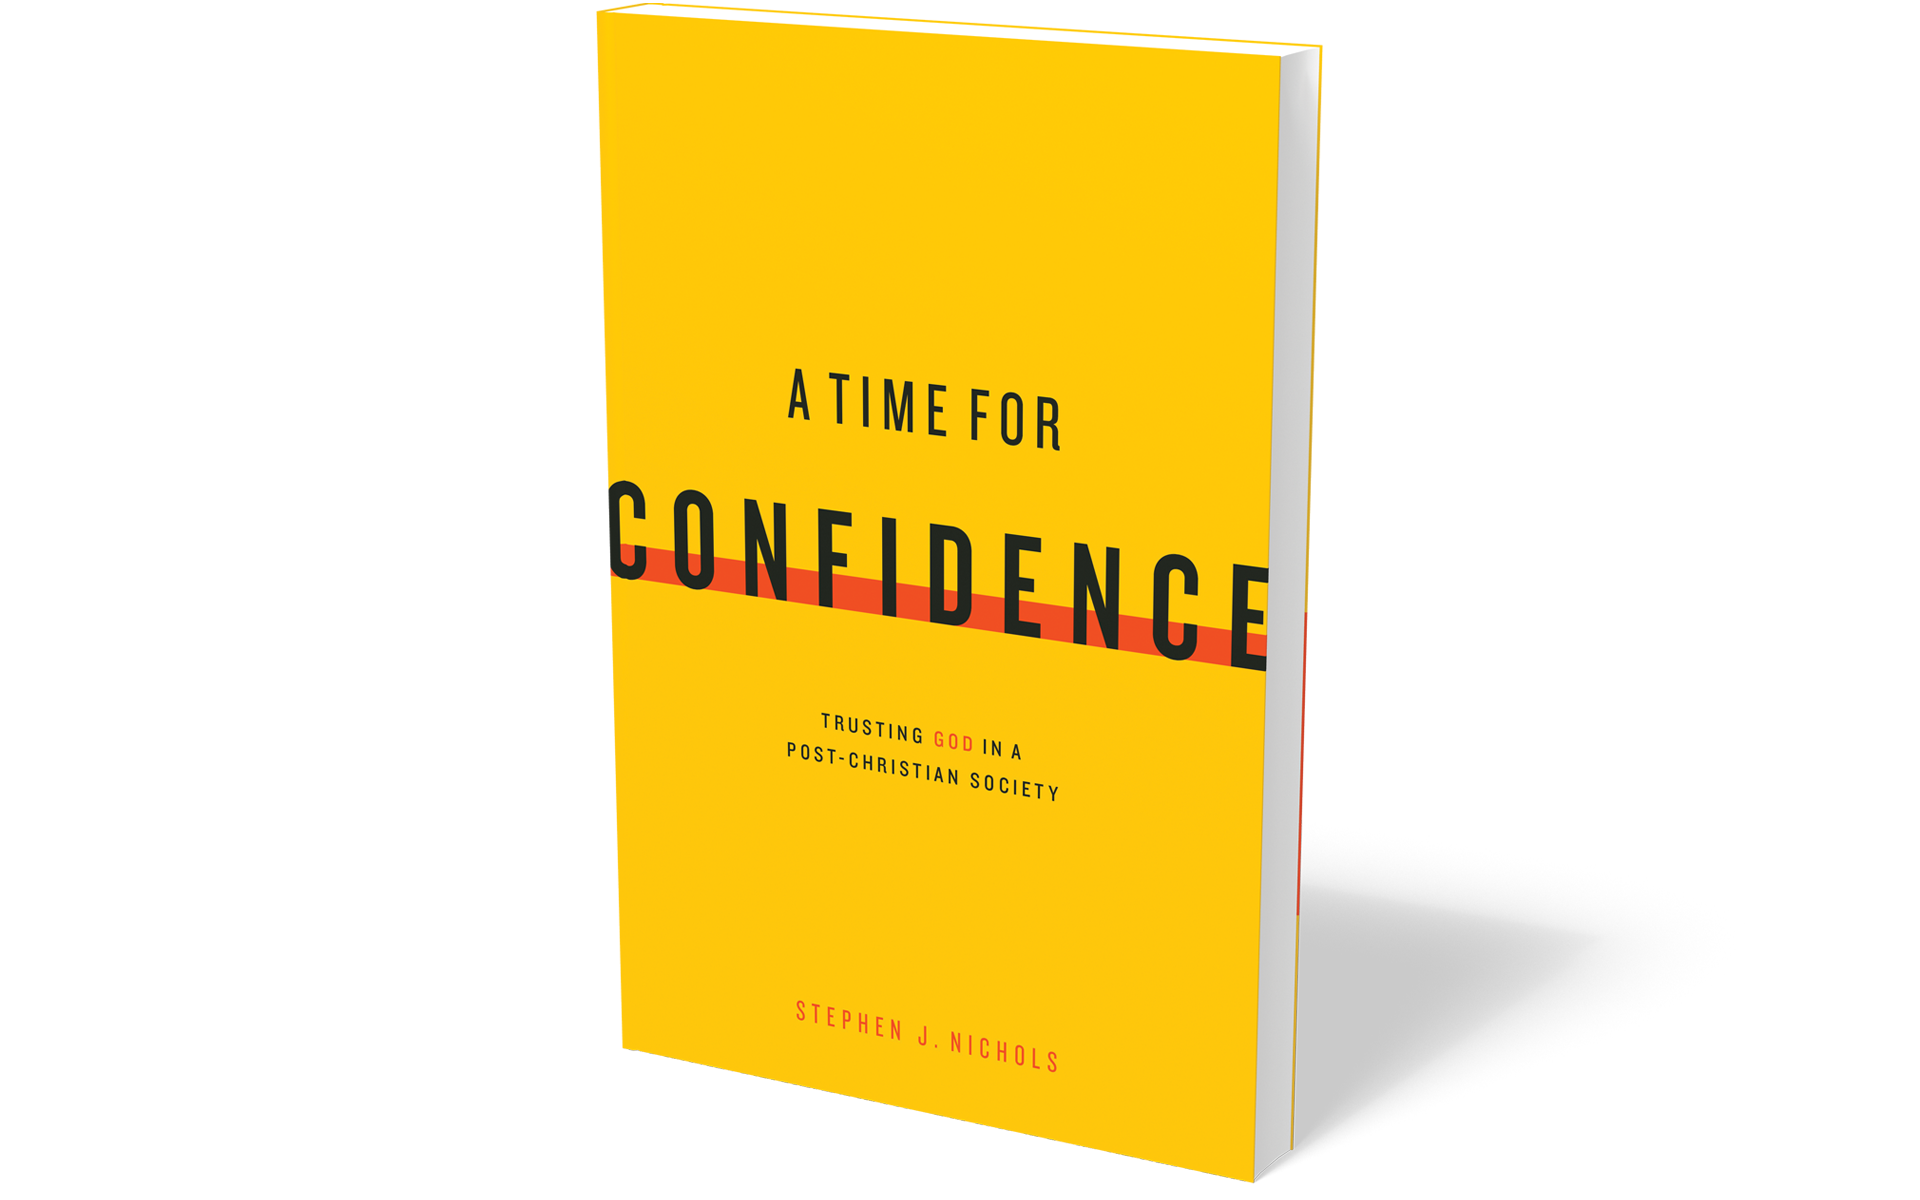 A Time for Confidence: Trusting God in a Post-Christian Society